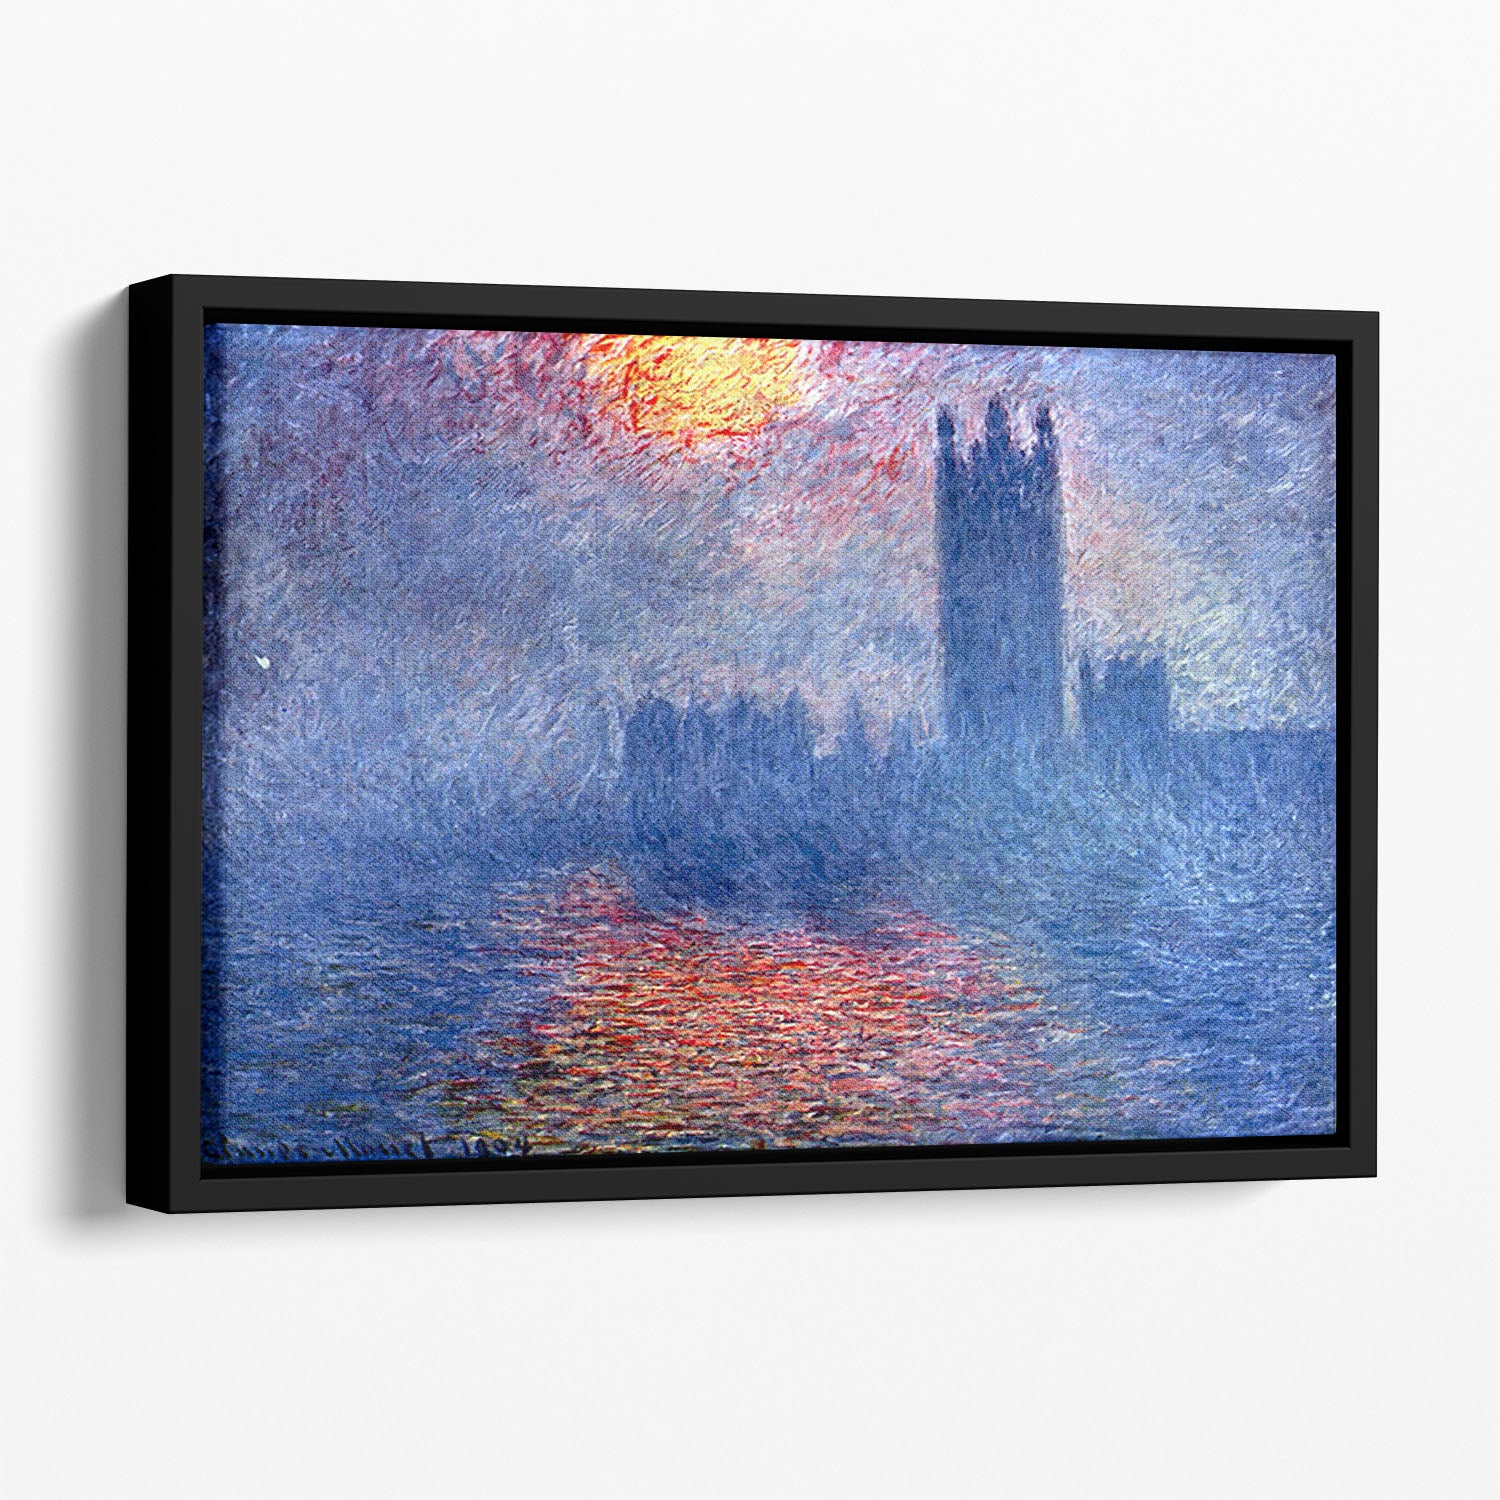 The Parlaiment in London by Monet Floating Framed Canvas